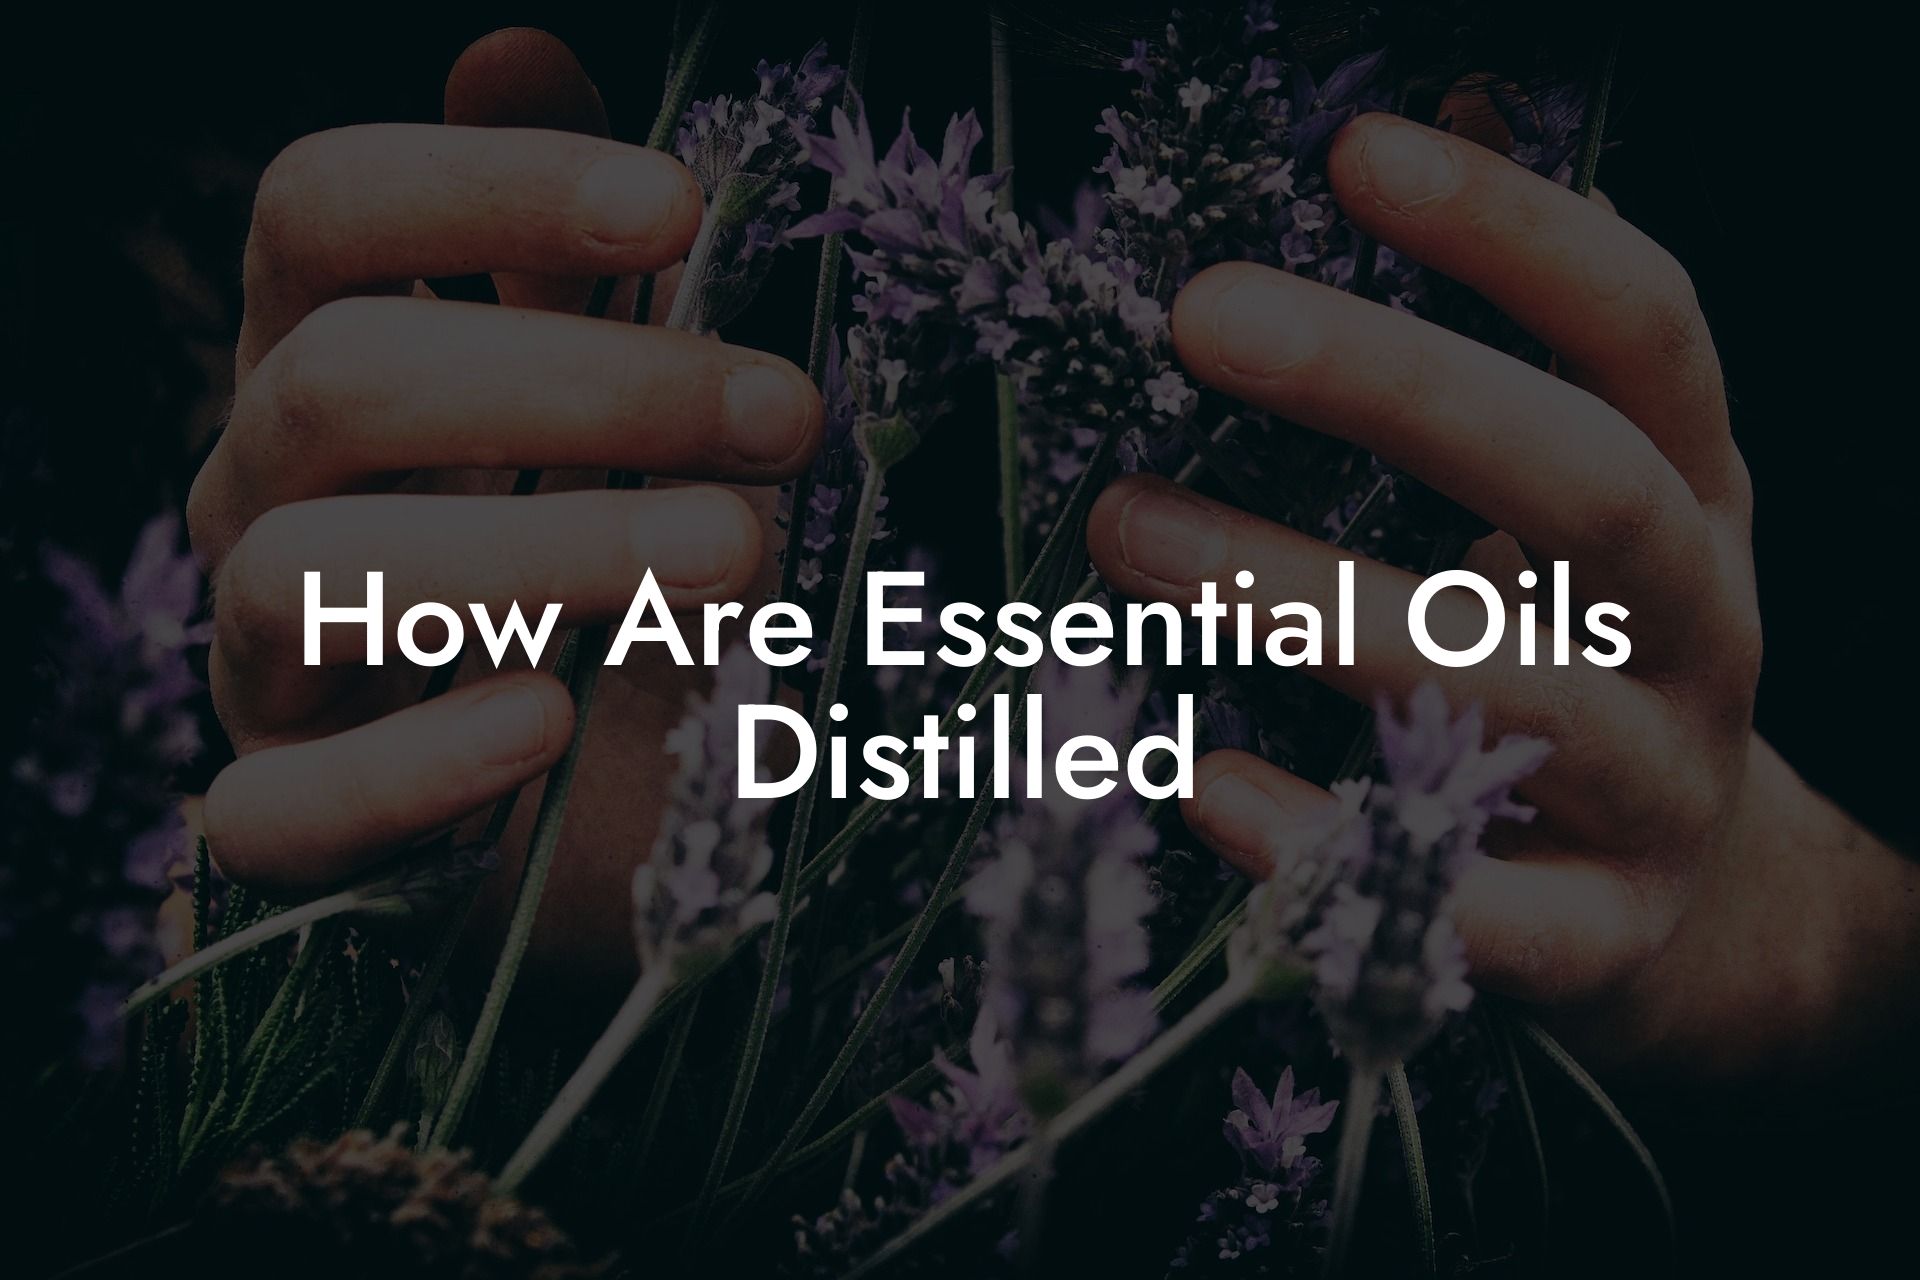 How Are Essential Oils Distilled